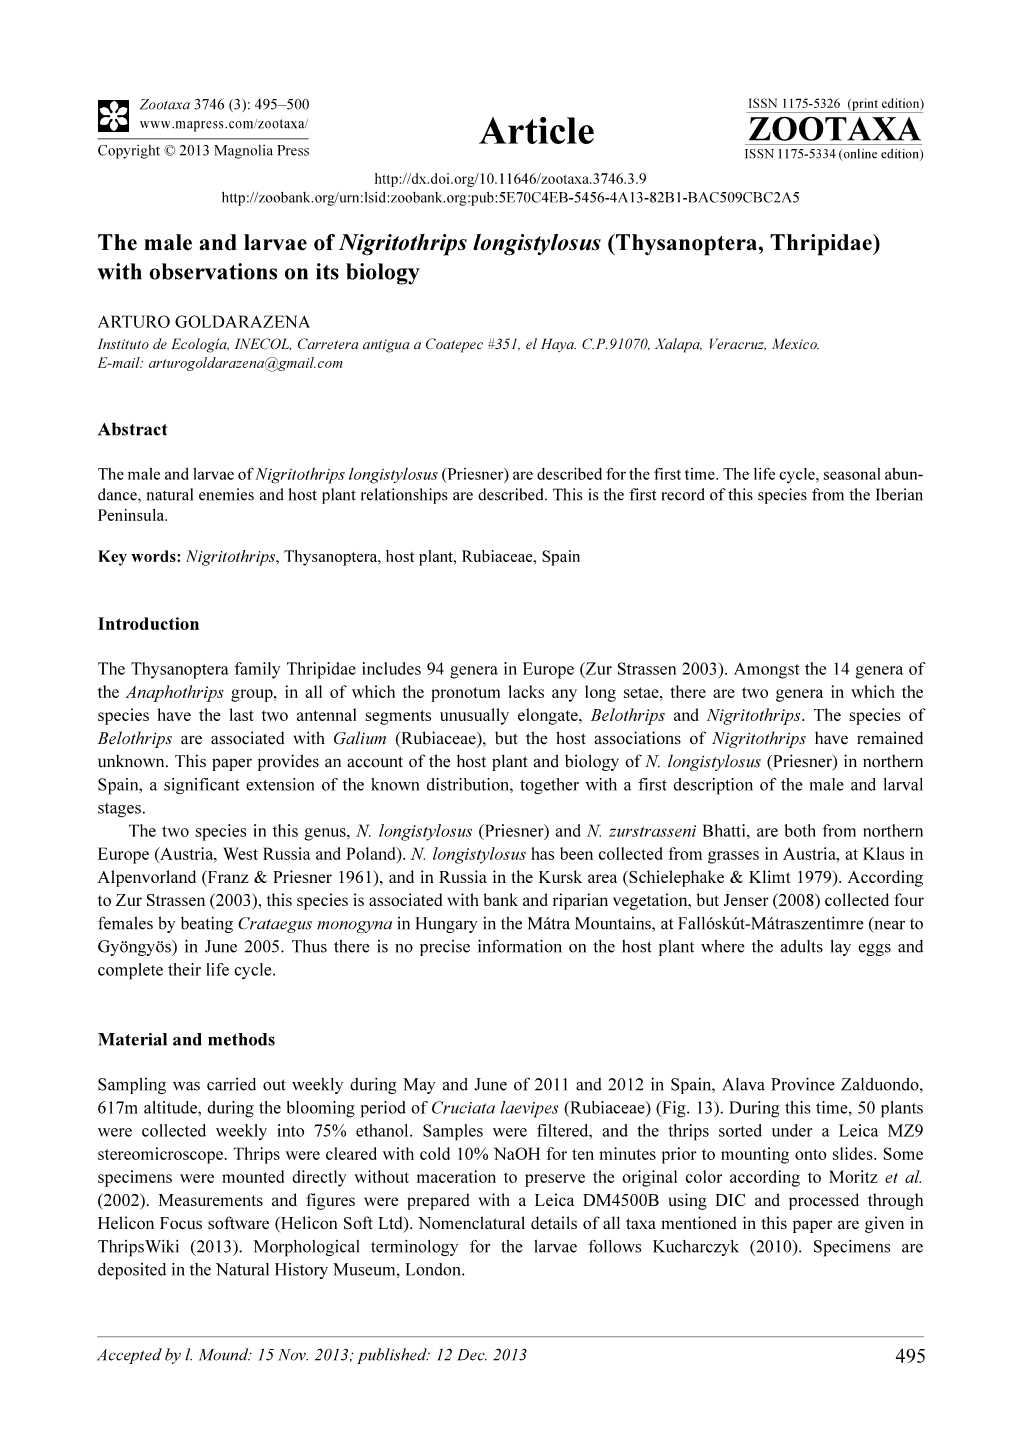 Thysanoptera, Thripidae) with Observations on Its Biology